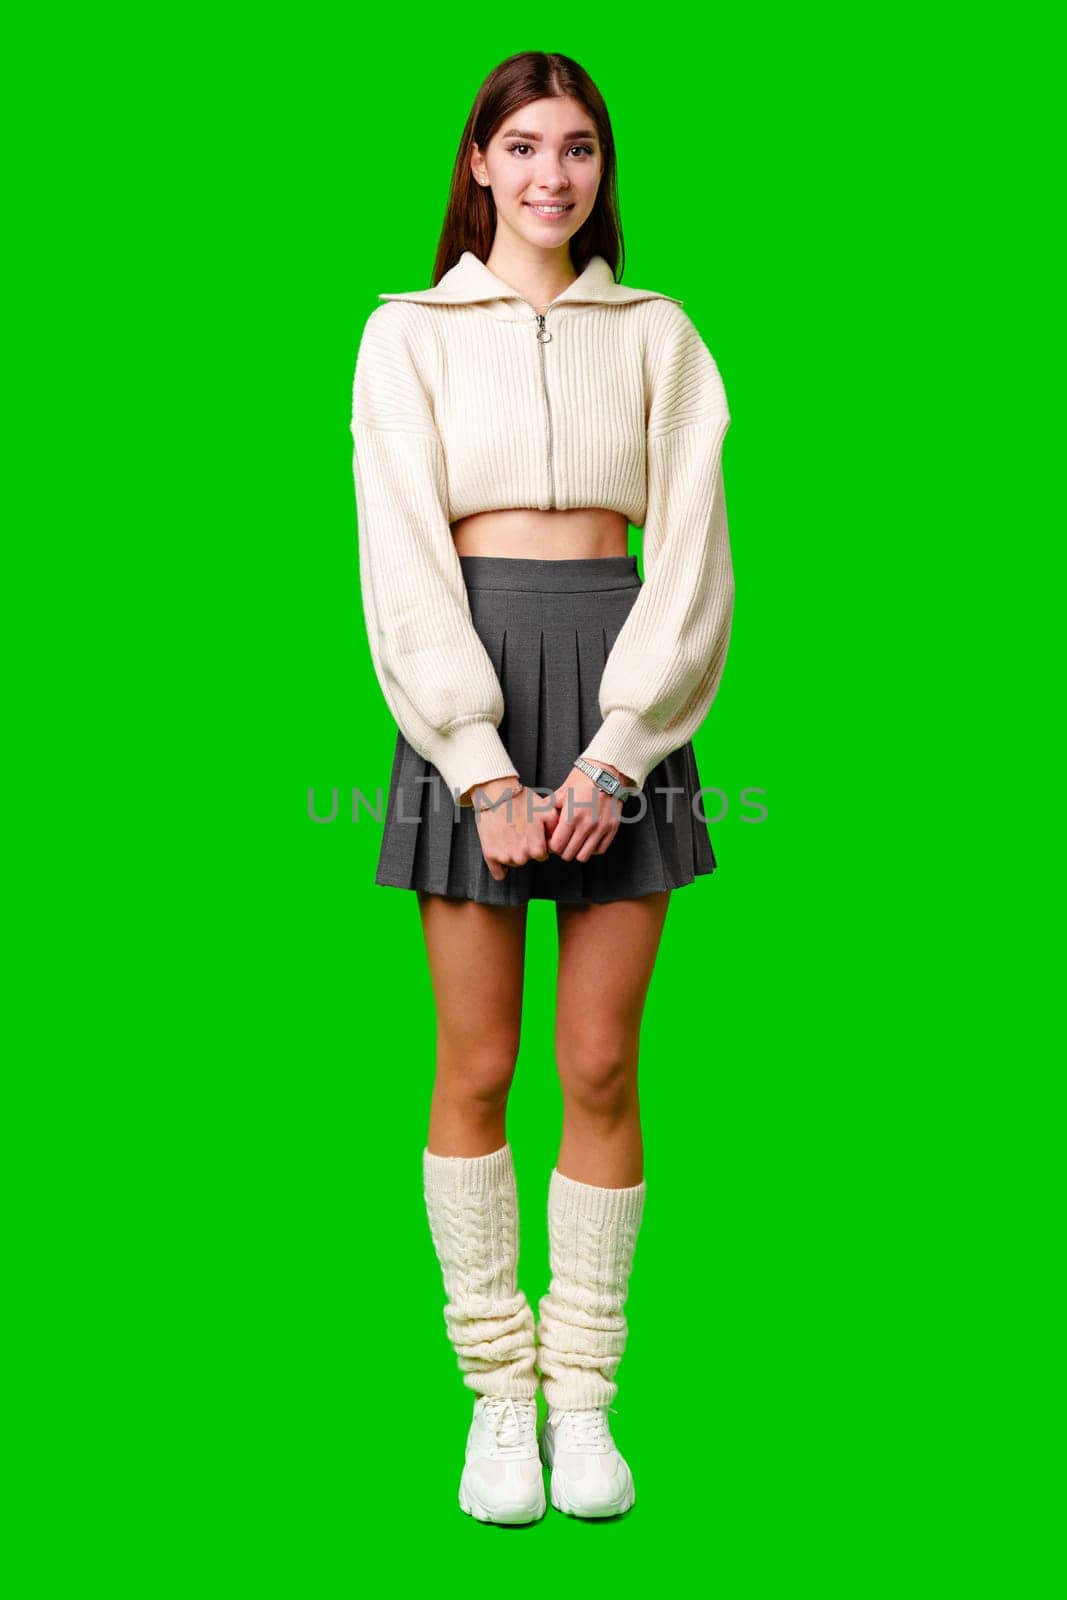 A cheerful young woman stands with confidence against a green backdrop, dressed in a white zippered sweater and a grey skirt. Her hands are gently clasped in front of her as she conveys a friendly demeanor with her smile.